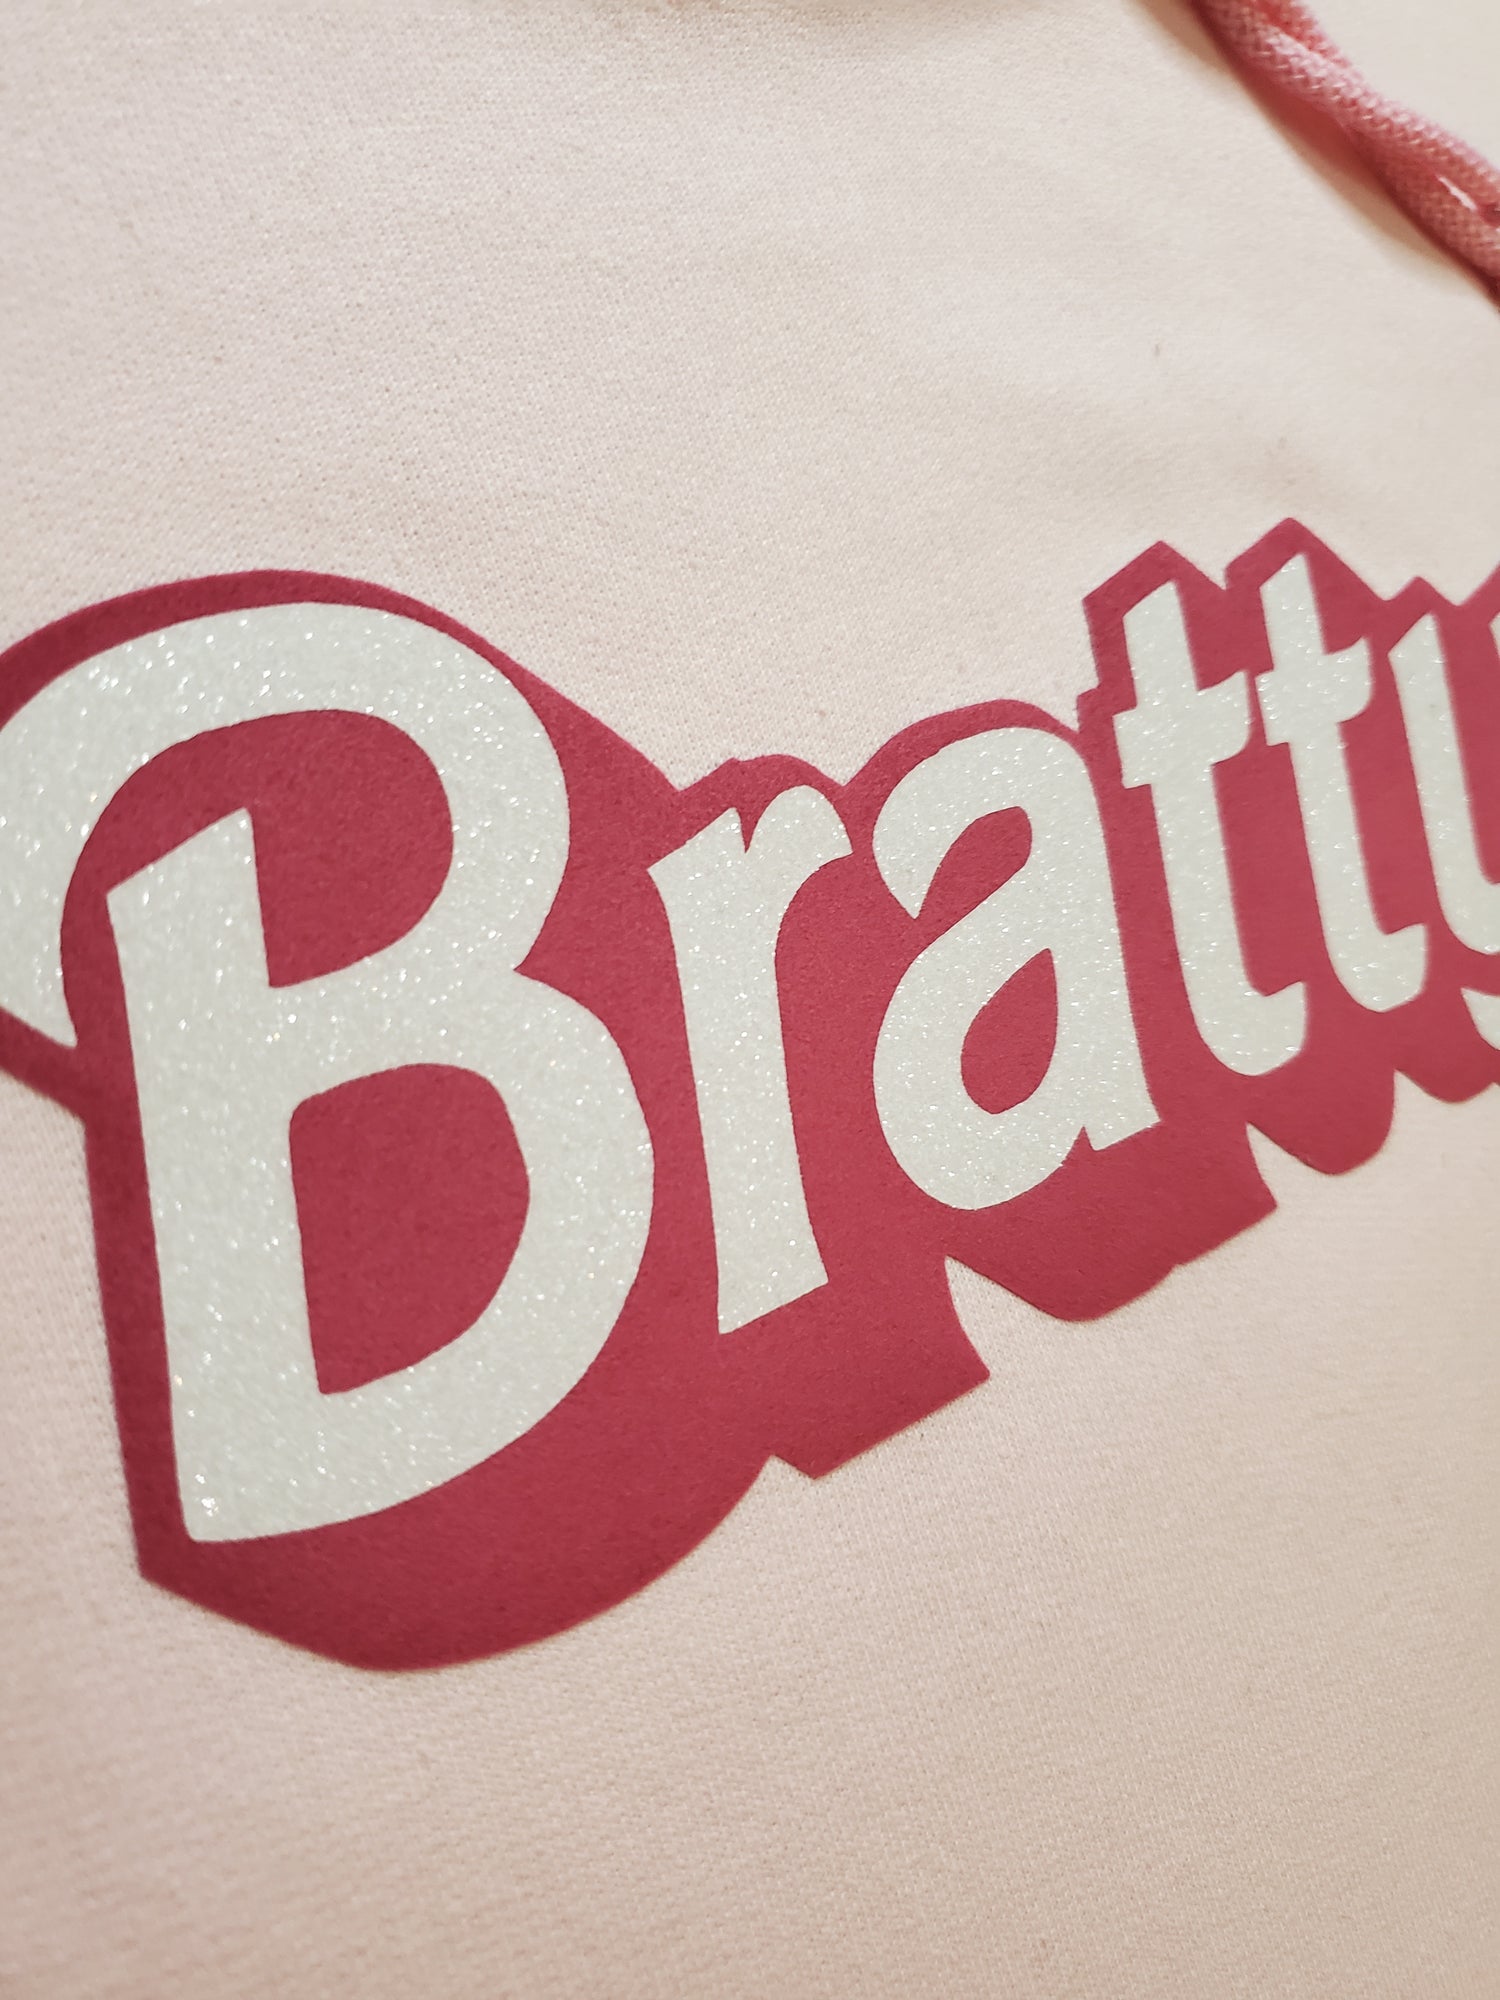 Bratty Cropped Hoodie - Centre Ave Clothing Co.